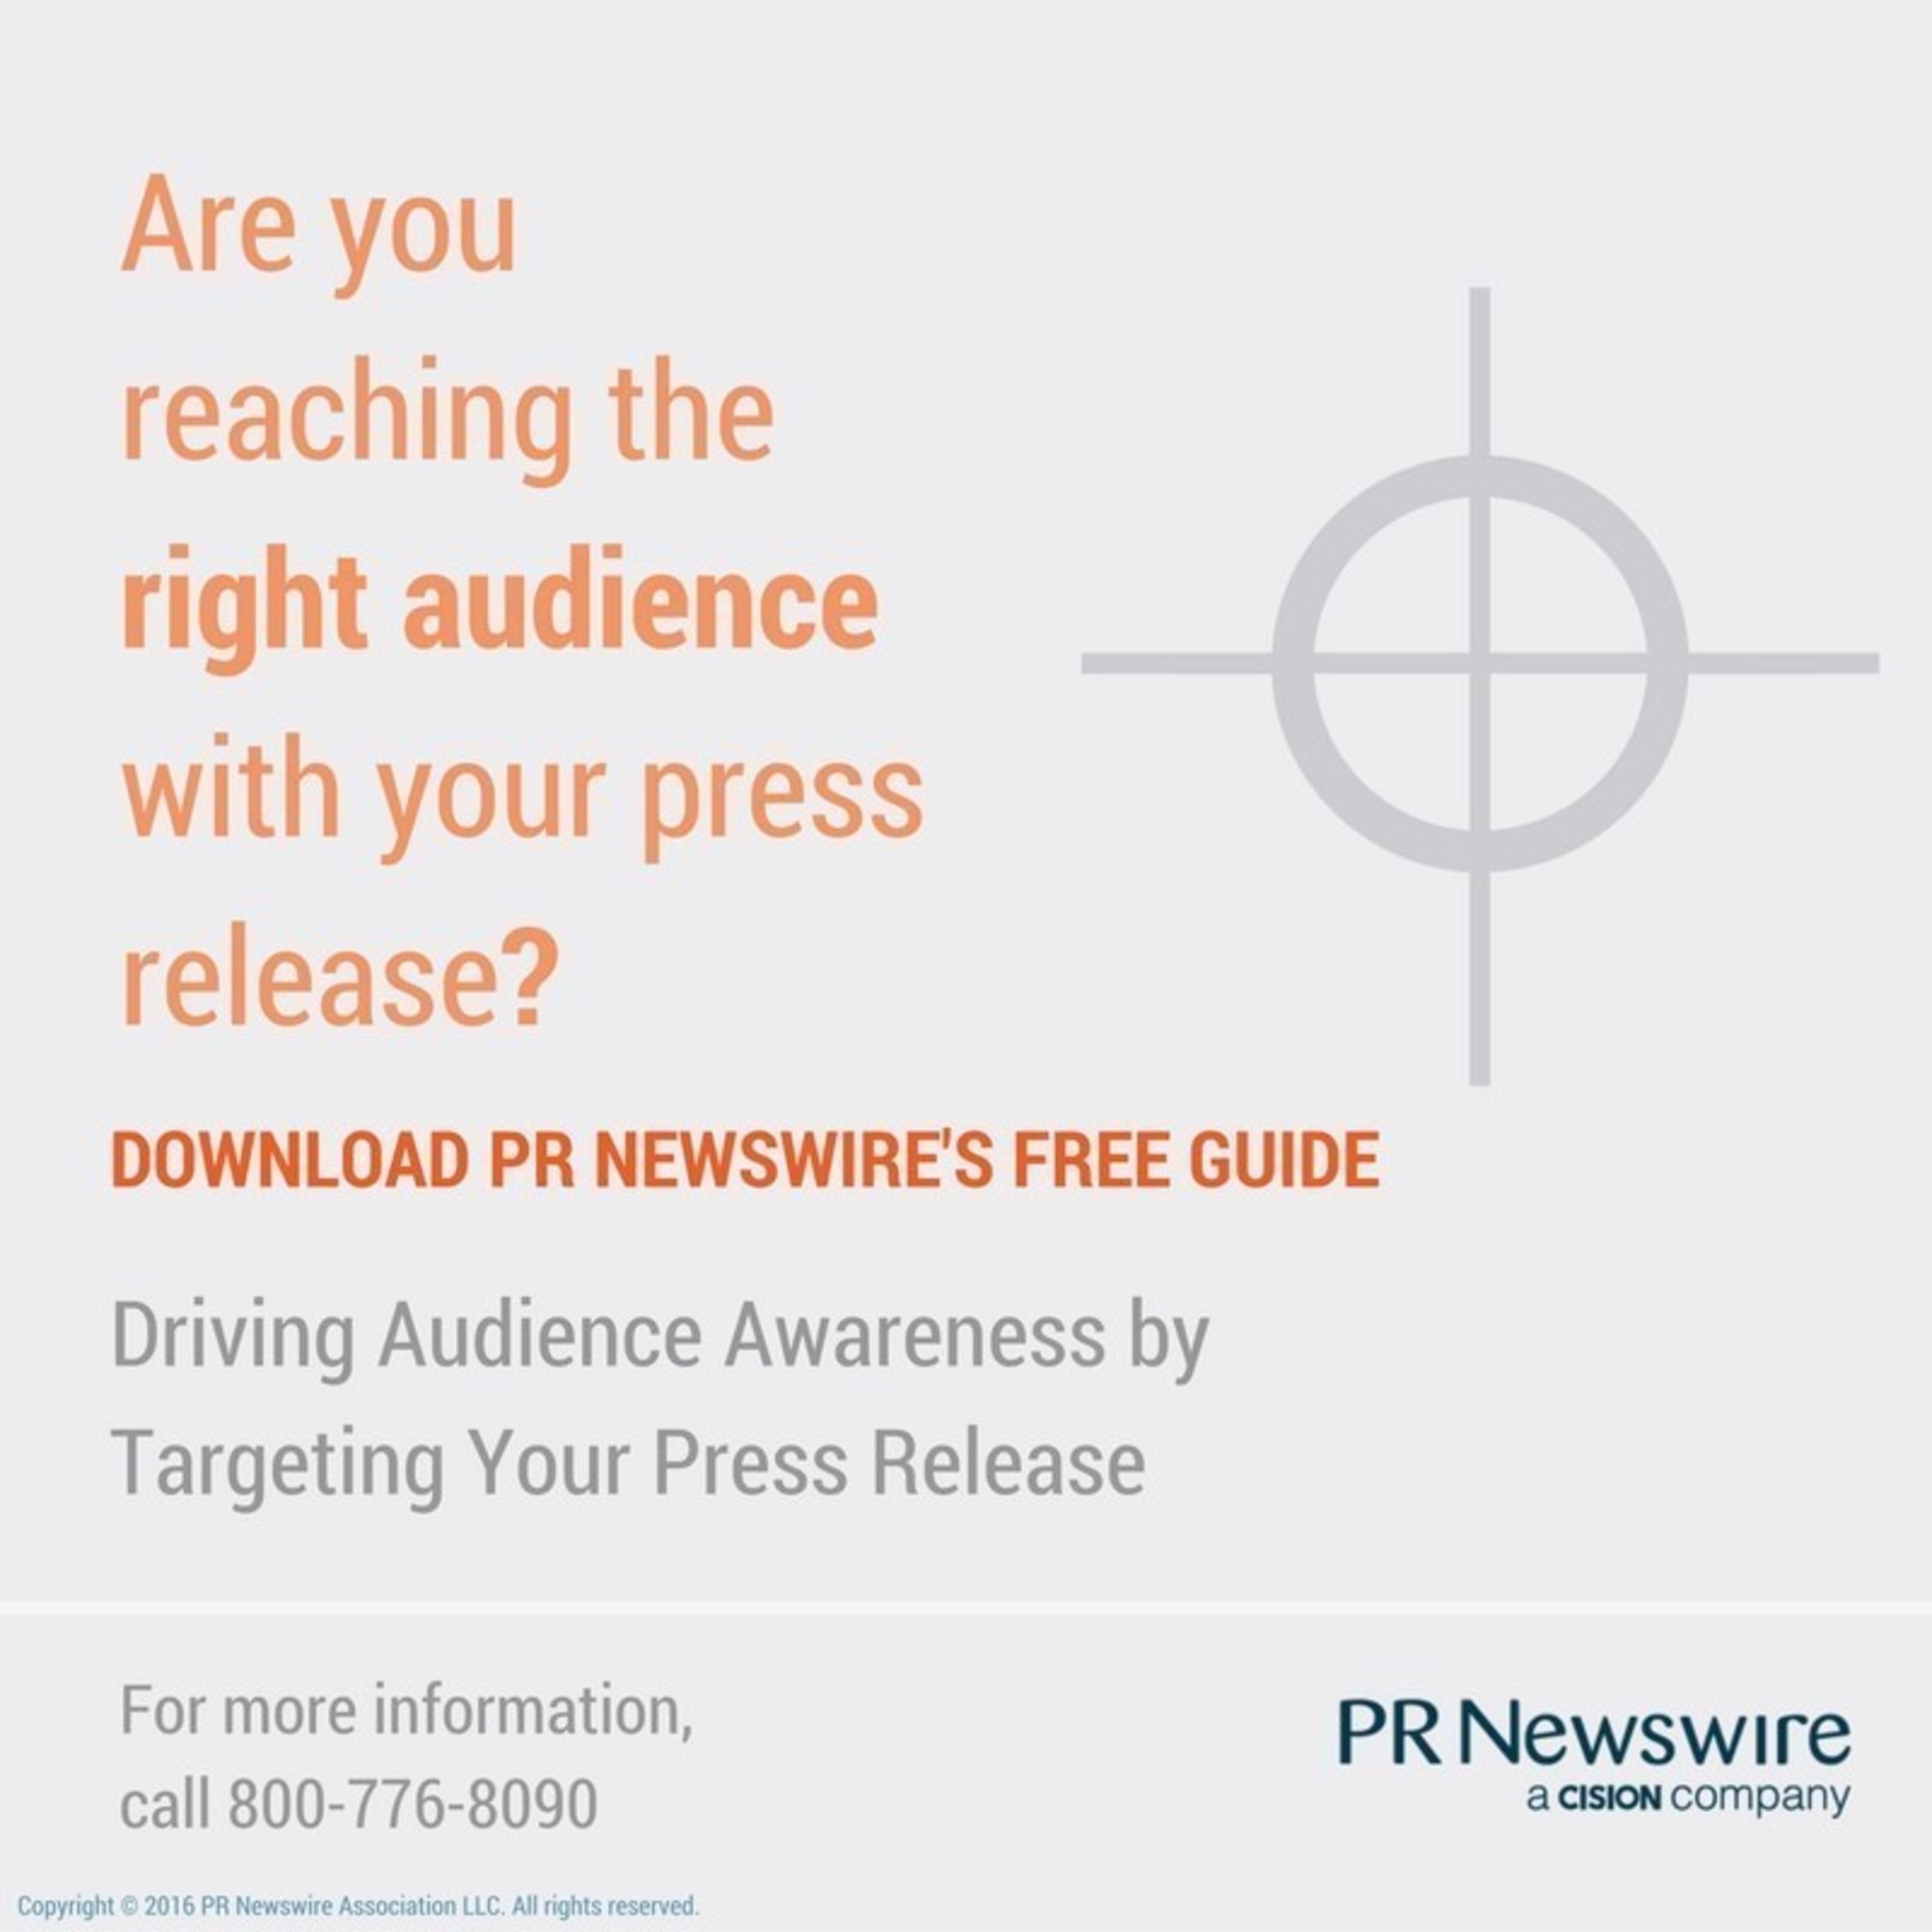 Driving Audience Awareness by Targeting Your Press Release: http://prn.to/2c8Mysb